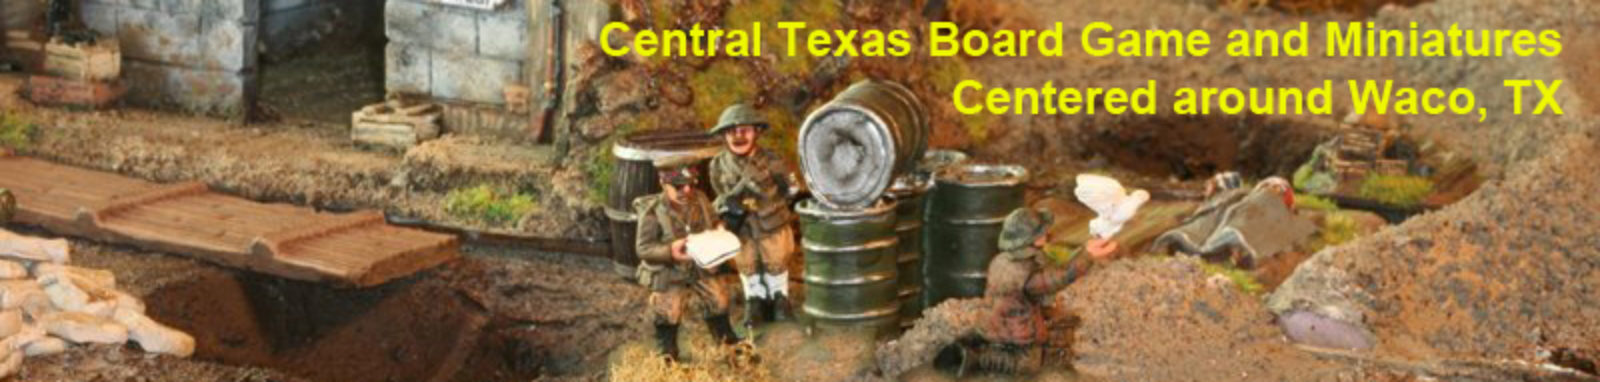 Central Texas Board Game and Miniatures